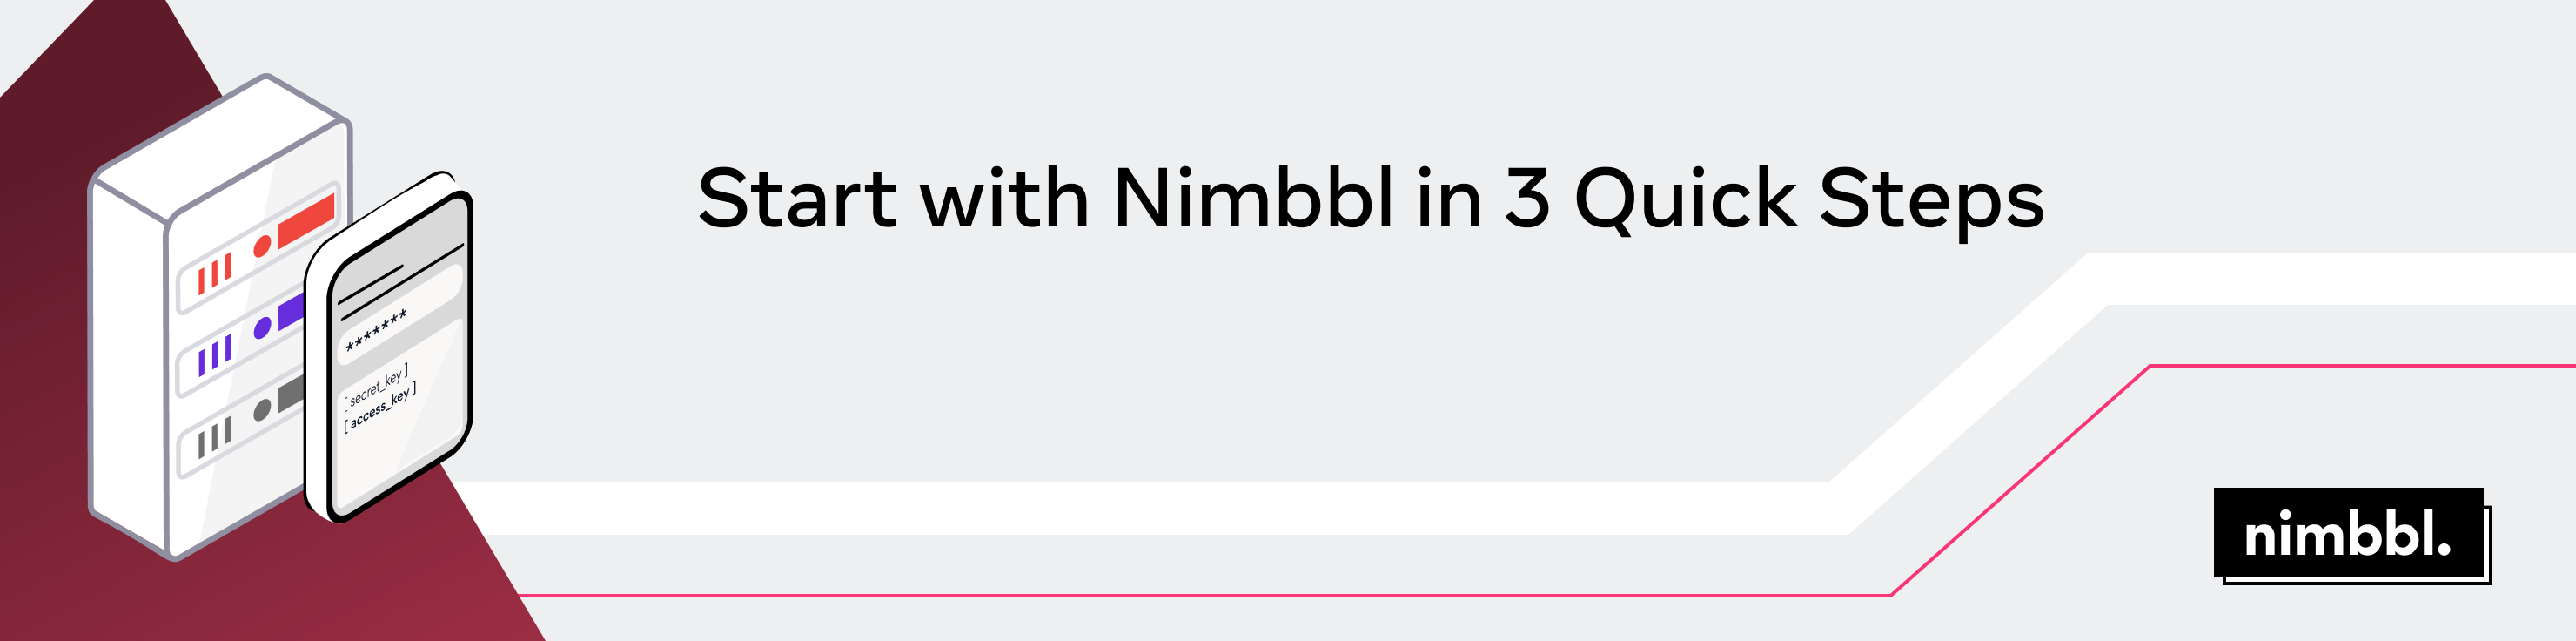 Start with Nimbbl in 3 Quick Steps